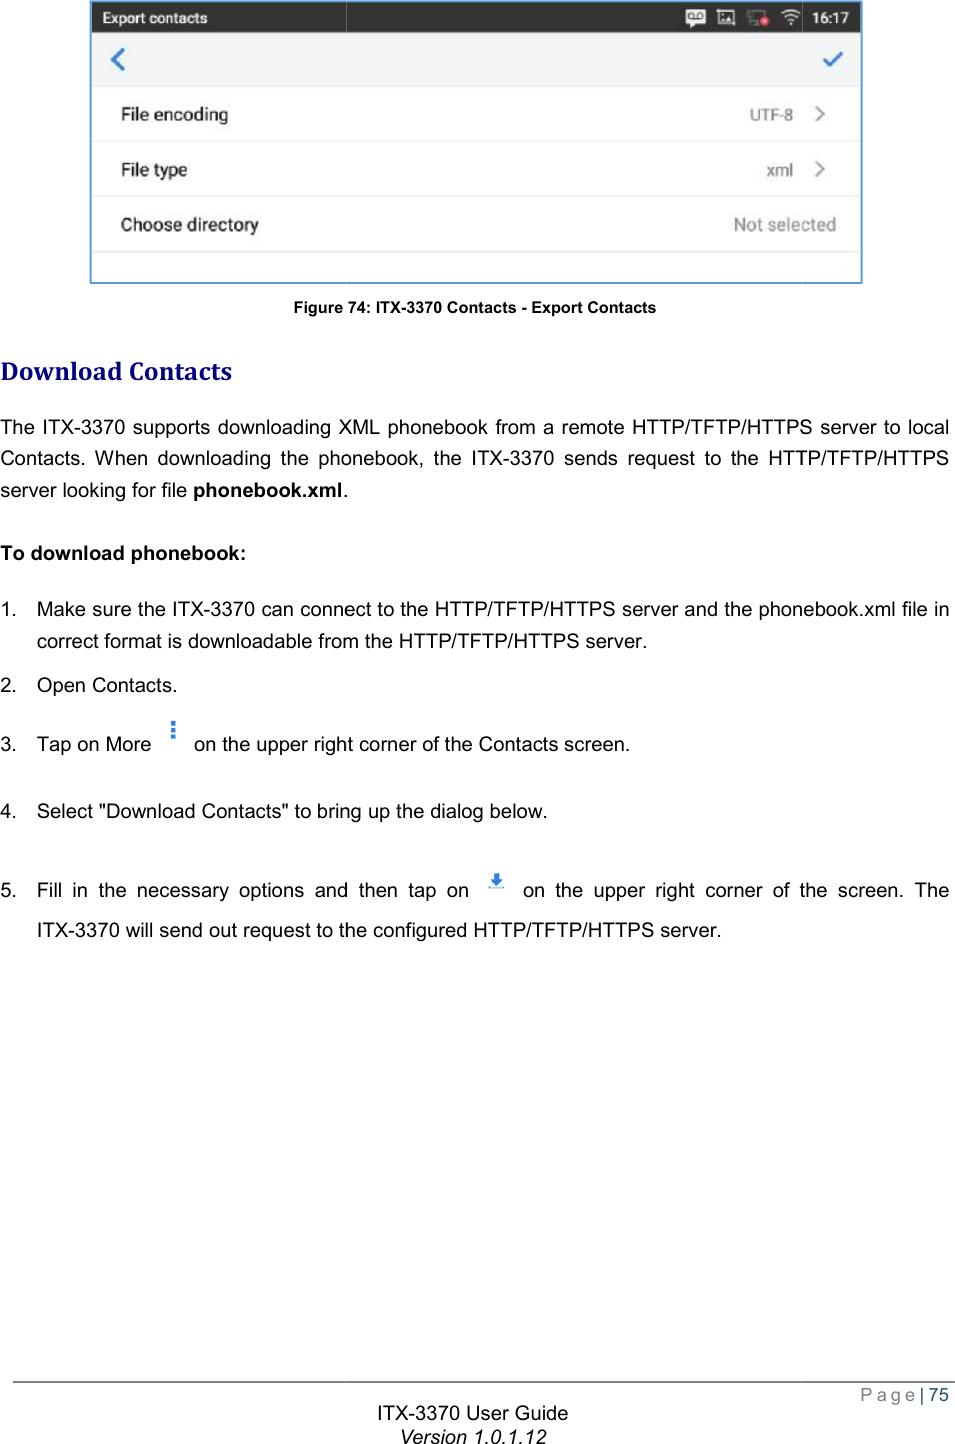   Figure Download Contacts The ITX-3370 supports downloading XML phonebook from a remote HTTP/TFTPContacts. When downloading the phonebook, the server looking for file phonebook.xml.  To download phonebook: 1. Make sure the ITX-3370 can connect to the HTTP/TFTPcorrect format is downloadable from the HTTP/TFTP2. Open Contacts. 3. Tap on More on the upper right 4. Select &quot;Download Contacts&quot; to bring up the dialog5. Fill in the necessary options and then tap on ITX-3370 will send out request to the configured HTTP/TFTP/HTTPS server. ITX-3370 User Guide Version 1.0.1.12 Figure 74: ITX-3370 Contacts - Export Contacts supports downloading XML phonebook from a remote HTTP/TFTP/HTTPSContacts. When downloading the phonebook, the ITX-3370 sends request to the HTT.  can connect to the HTTP/TFTP/HTTPS server and the phonebook.xml file in correct format is downloadable from the HTTP/TFTP/HTTPS server. the upper right corner of the Contacts screen. &quot; to bring up the dialog below. Fill in the necessary options and then tap on  on the upper right corner of the screen. The will send out request to the configured HTTP/TFTP/HTTPS server.  Page| 75  /HTTPS server to local sends request to the HTTP/TFTP/HTTPS server and the phonebook.xml file in on the upper right corner of the screen. The 